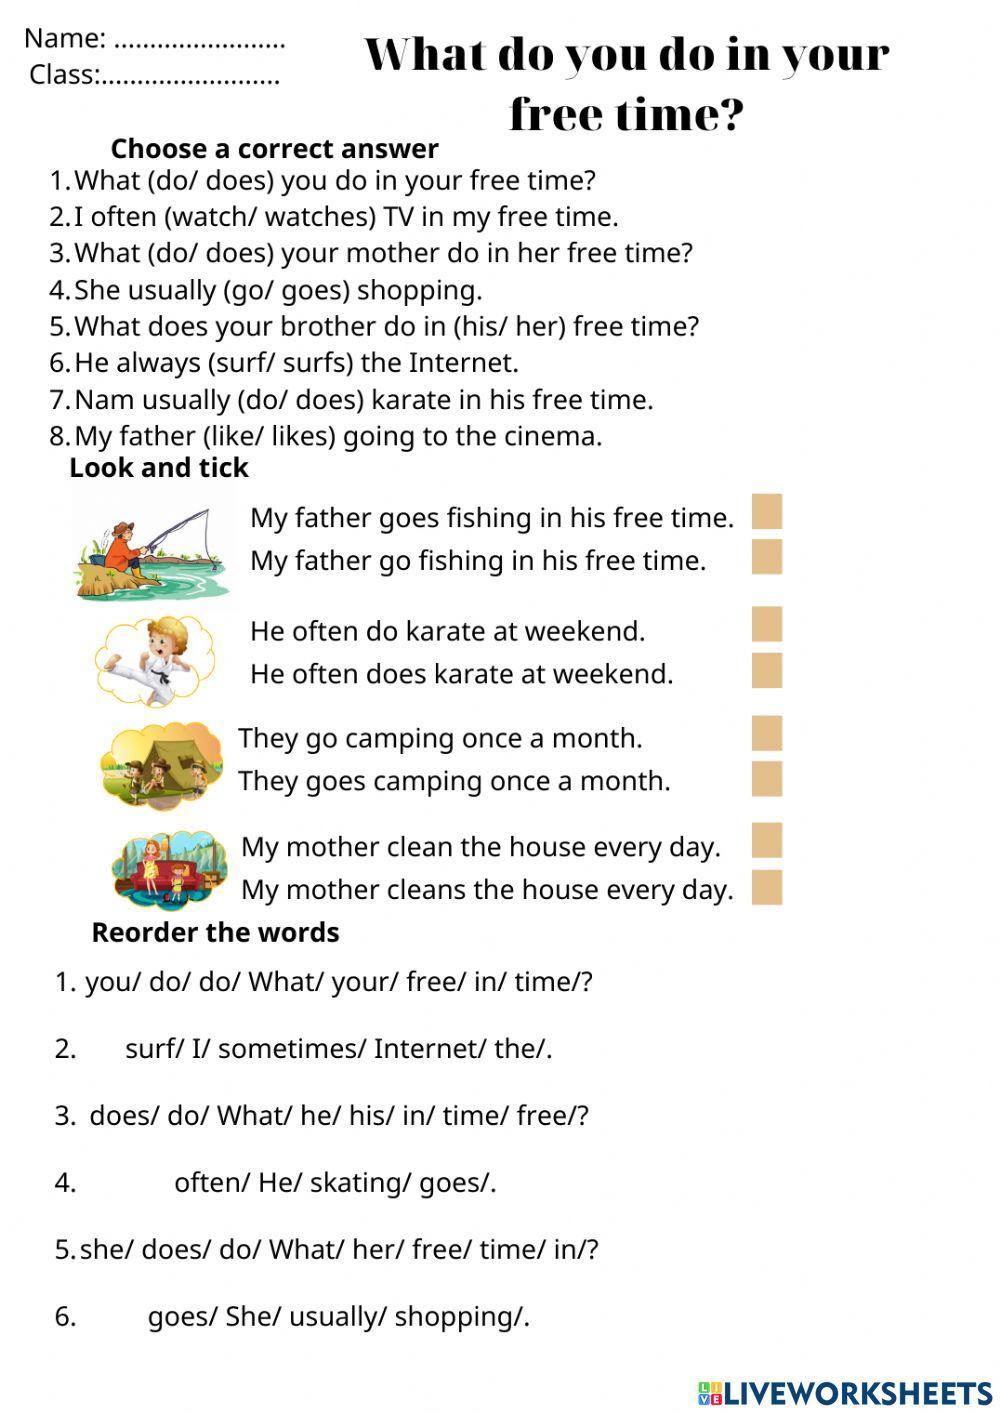 Unit 13: What do you do in your free time? Lesson 2